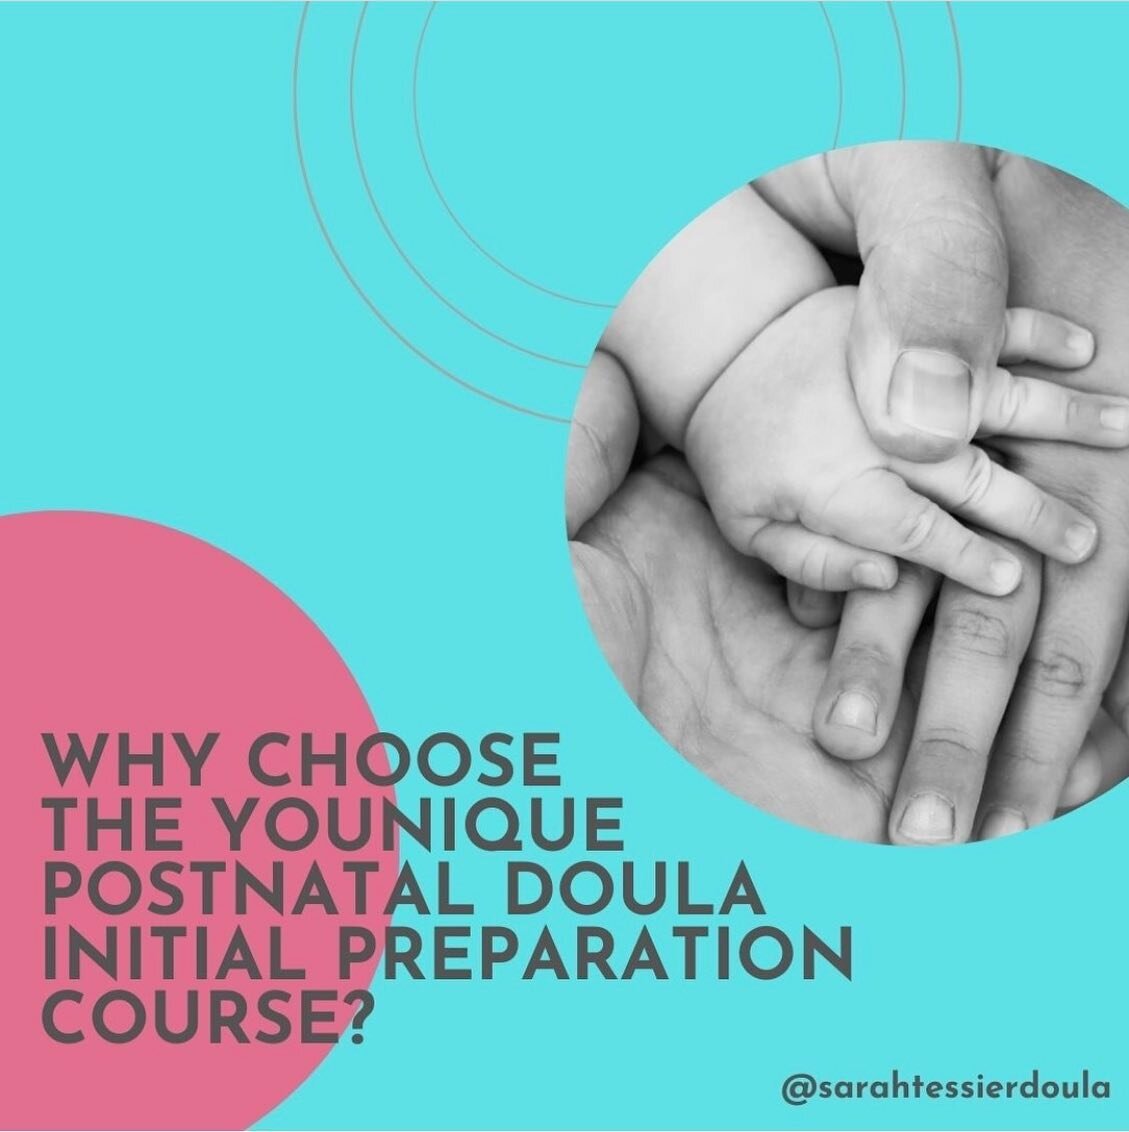 ✨Do you want to train as a postnatal doula?✨

If the answer is YES, come join me from March 11th - 15th when @kingstondoula and I will be facilitating the Younique Postnatal Doula Initial Preparation course here in south east London!

We&rsquo;ll spe